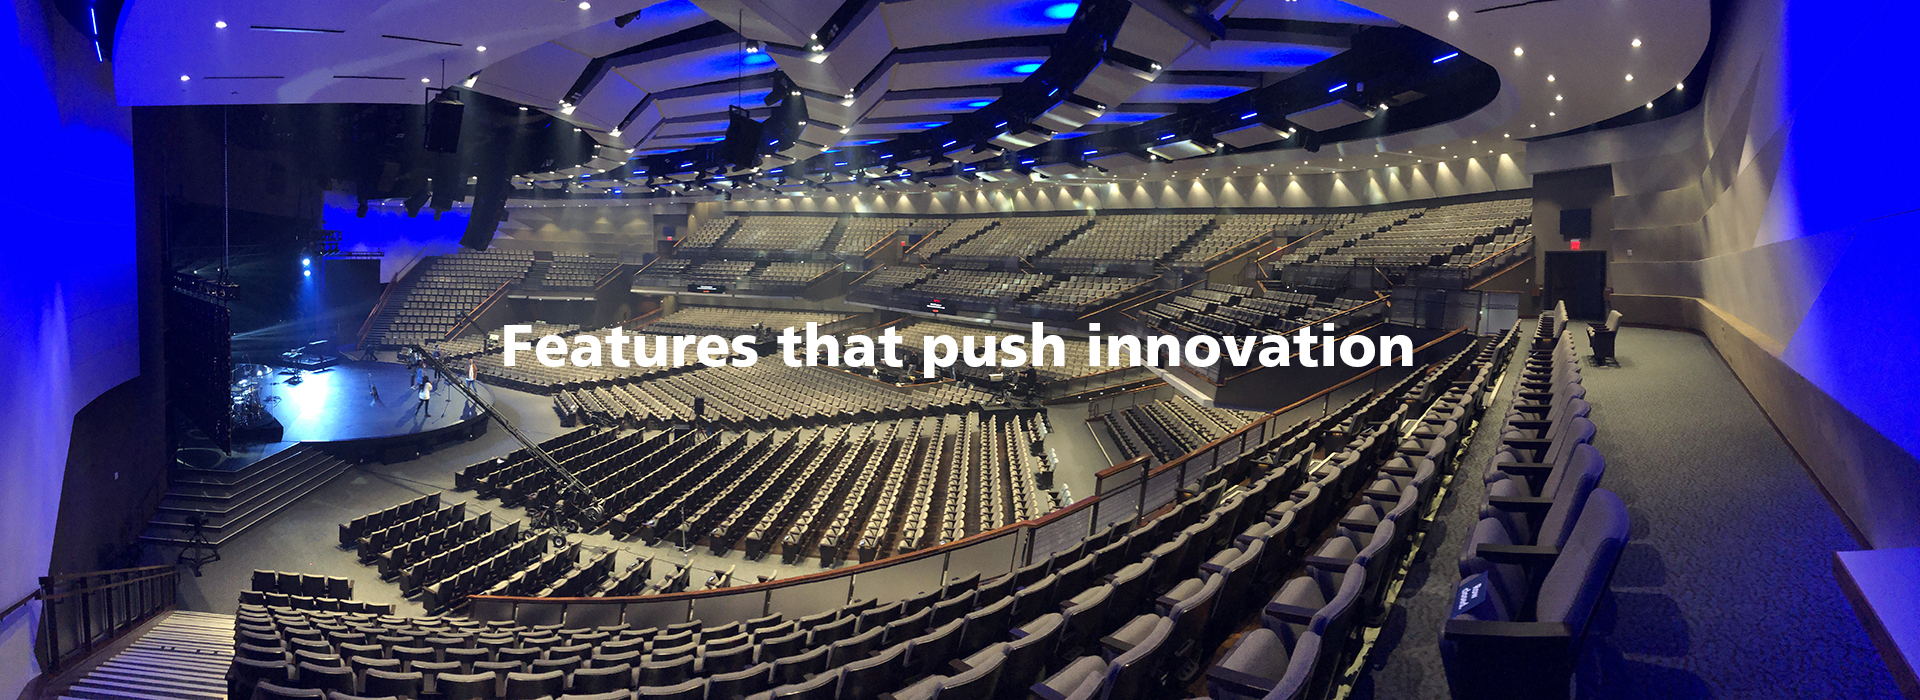 features that push innovation